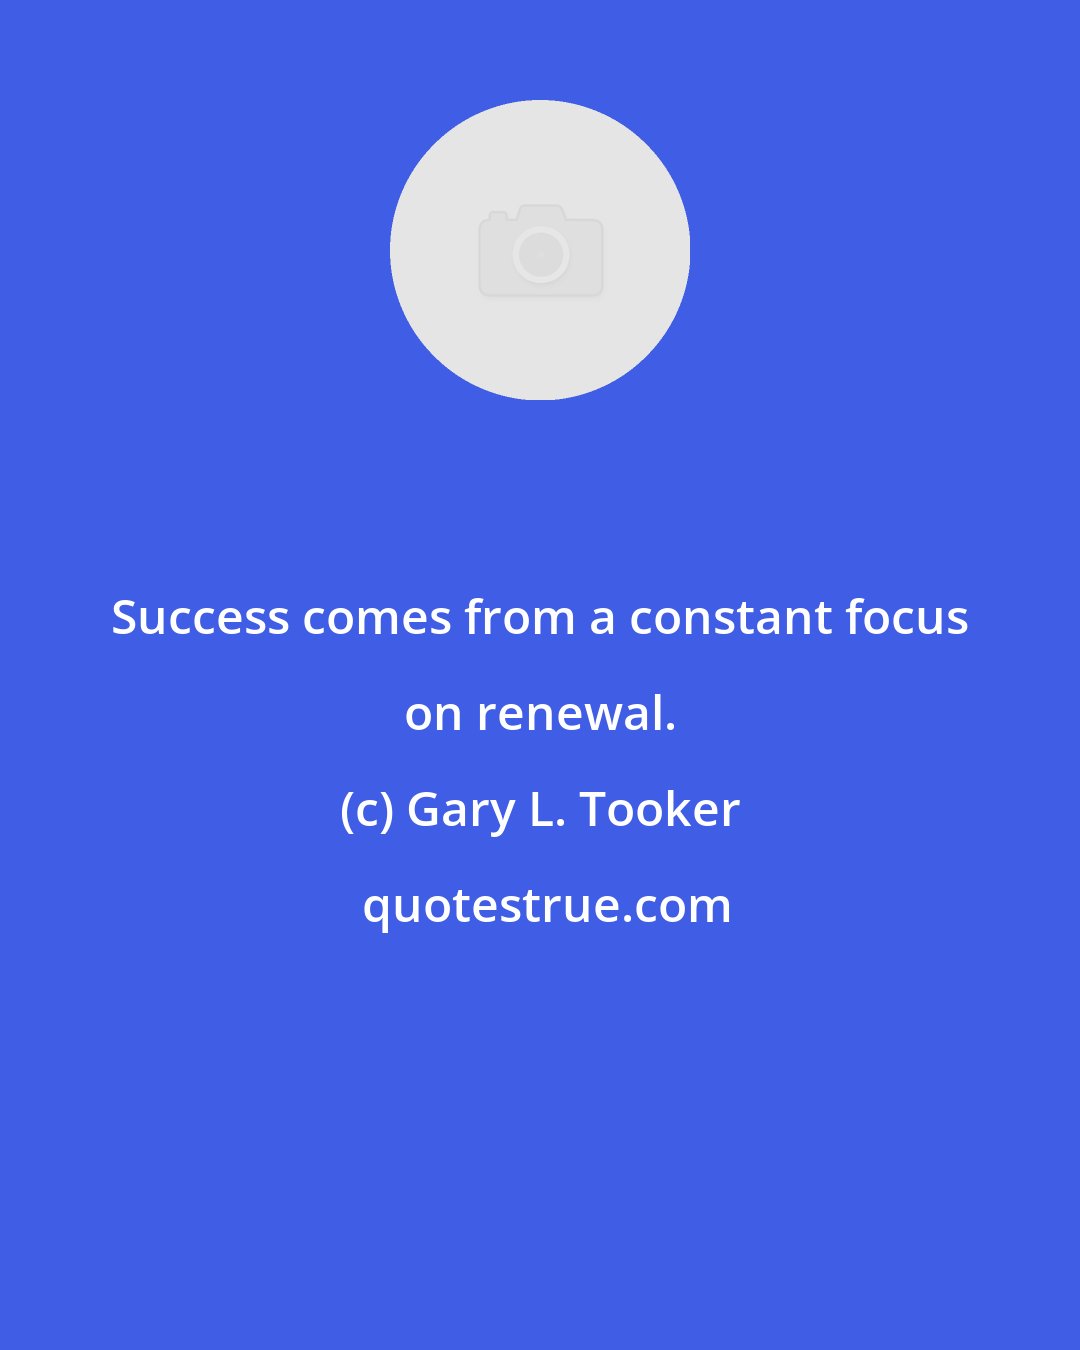 Gary L. Tooker: Success comes from a constant focus on renewal.